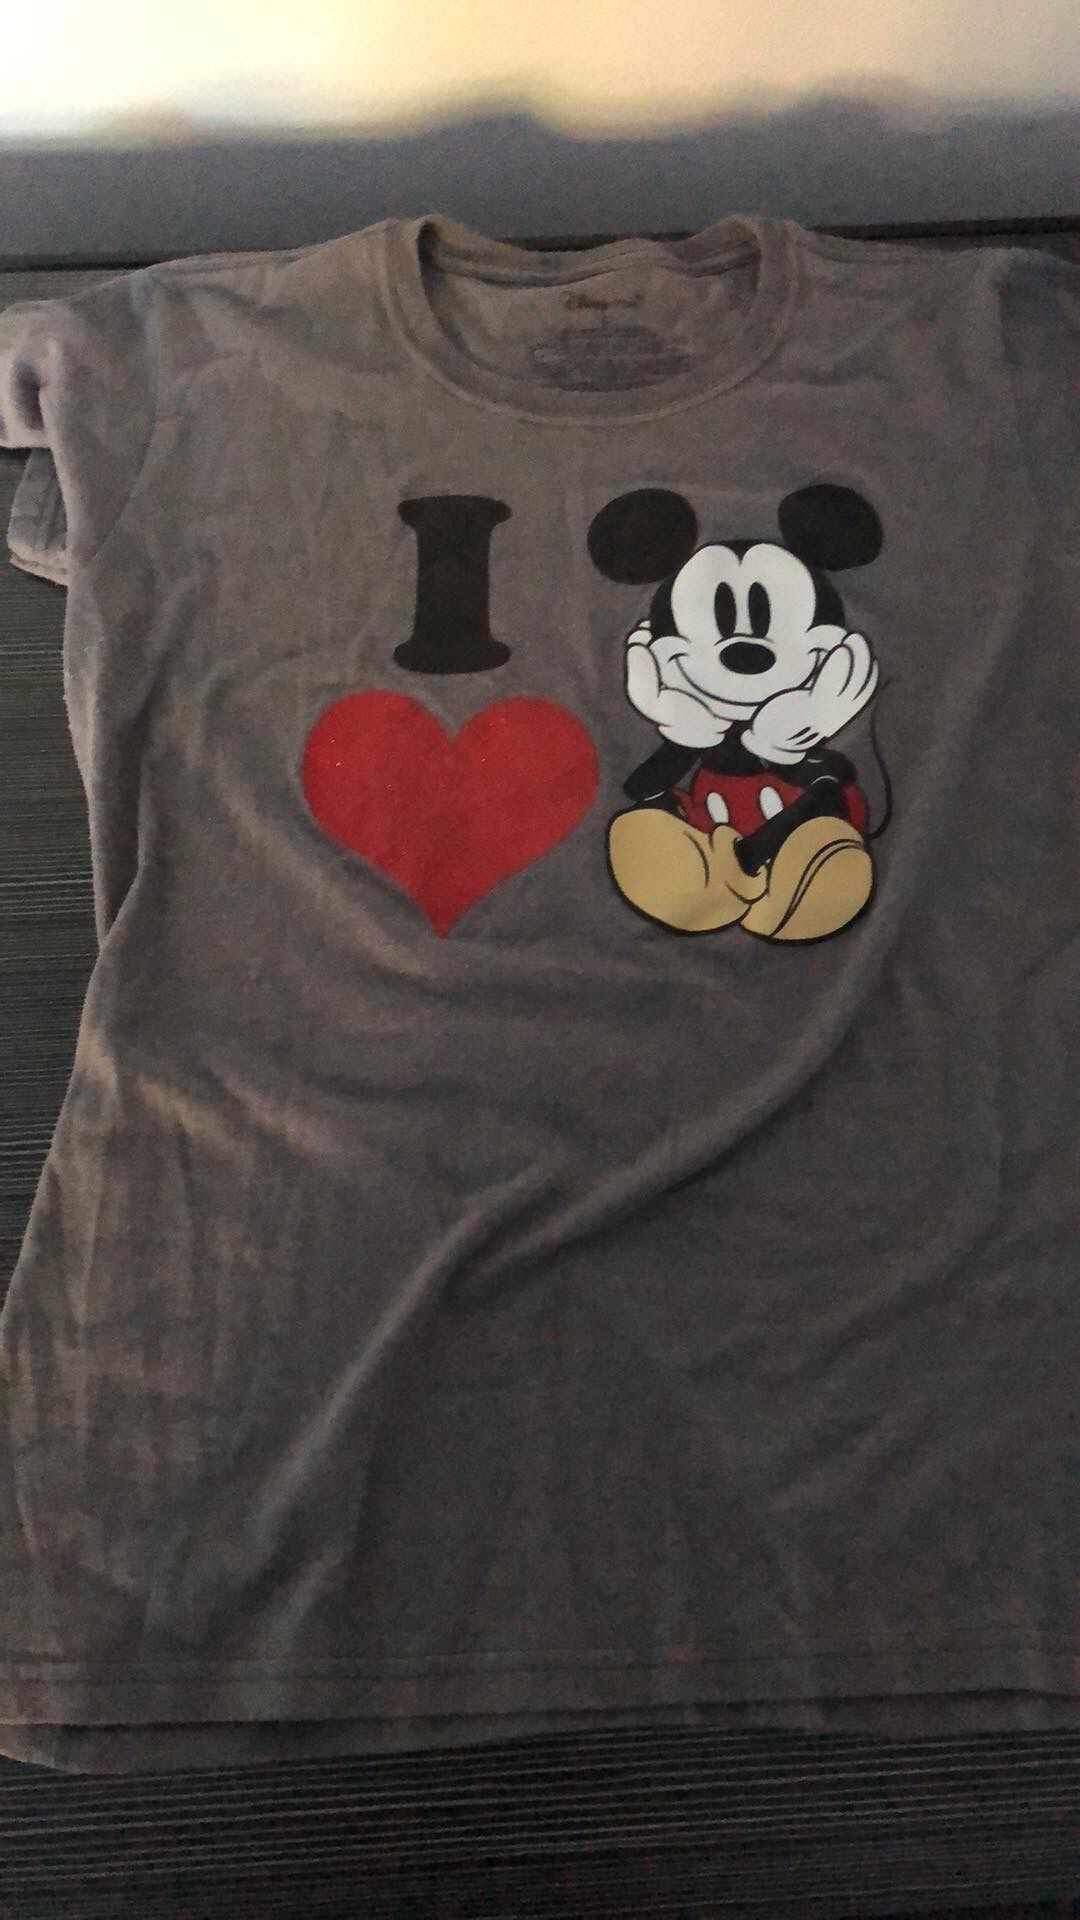 Calling Mickey & Disney Fans your choice $5 ladies tshirts